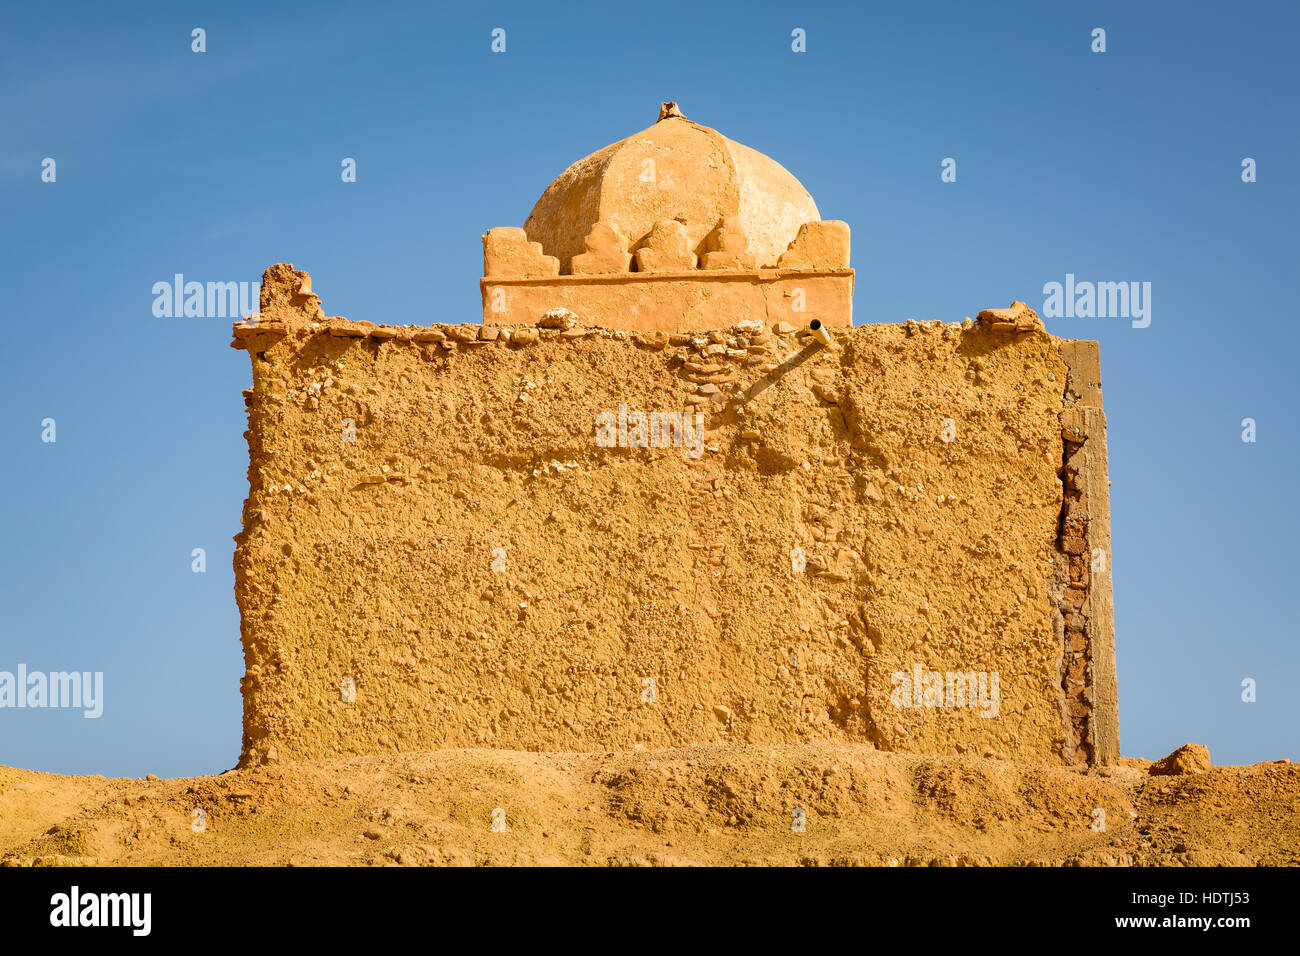 Traditional construction of small mosque in Tabourahte near Ait Ben Haddou, Morocco Stock Photo